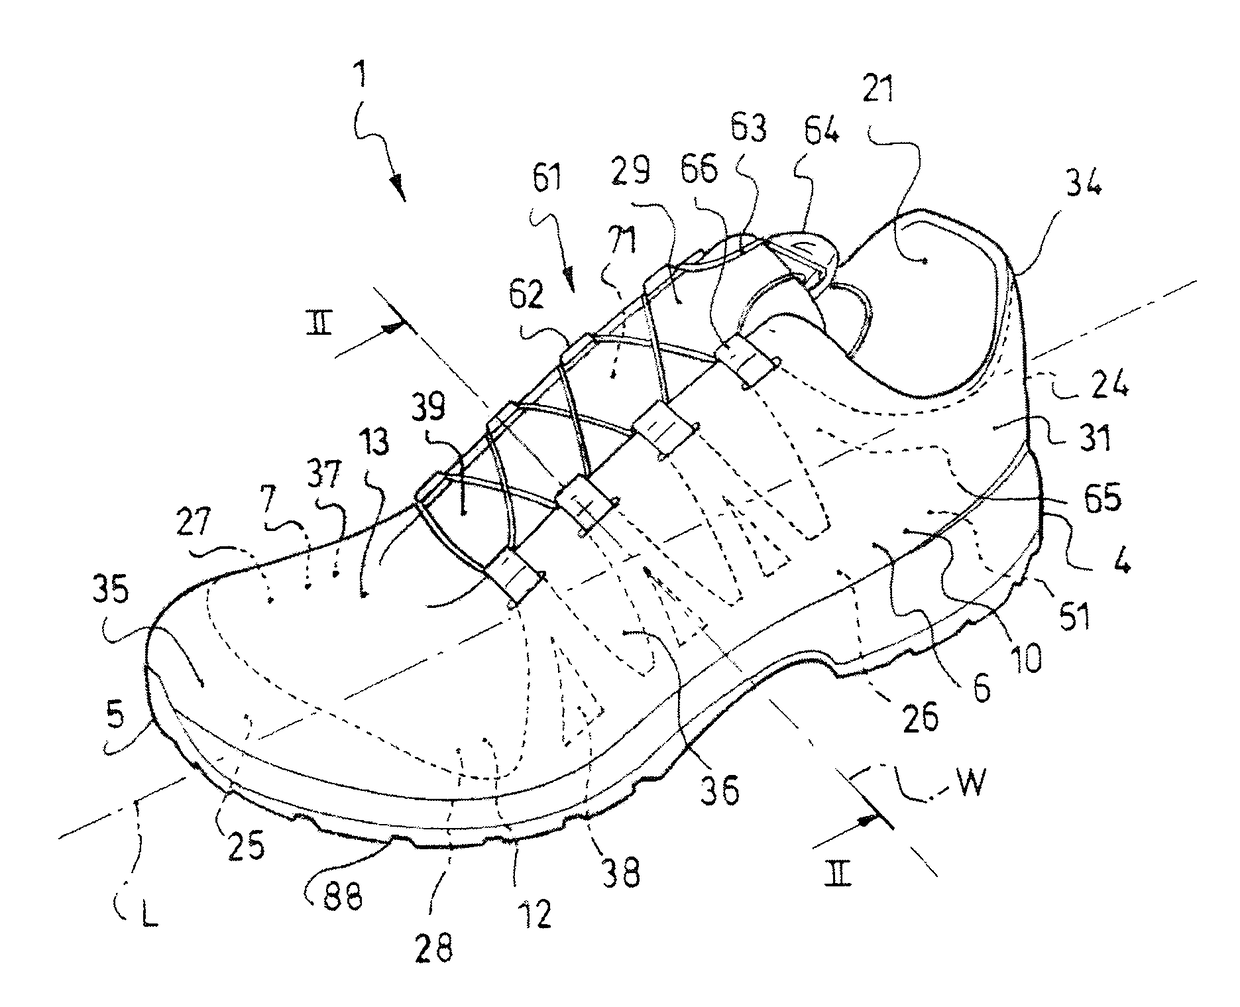 Article of footwear with improved structure